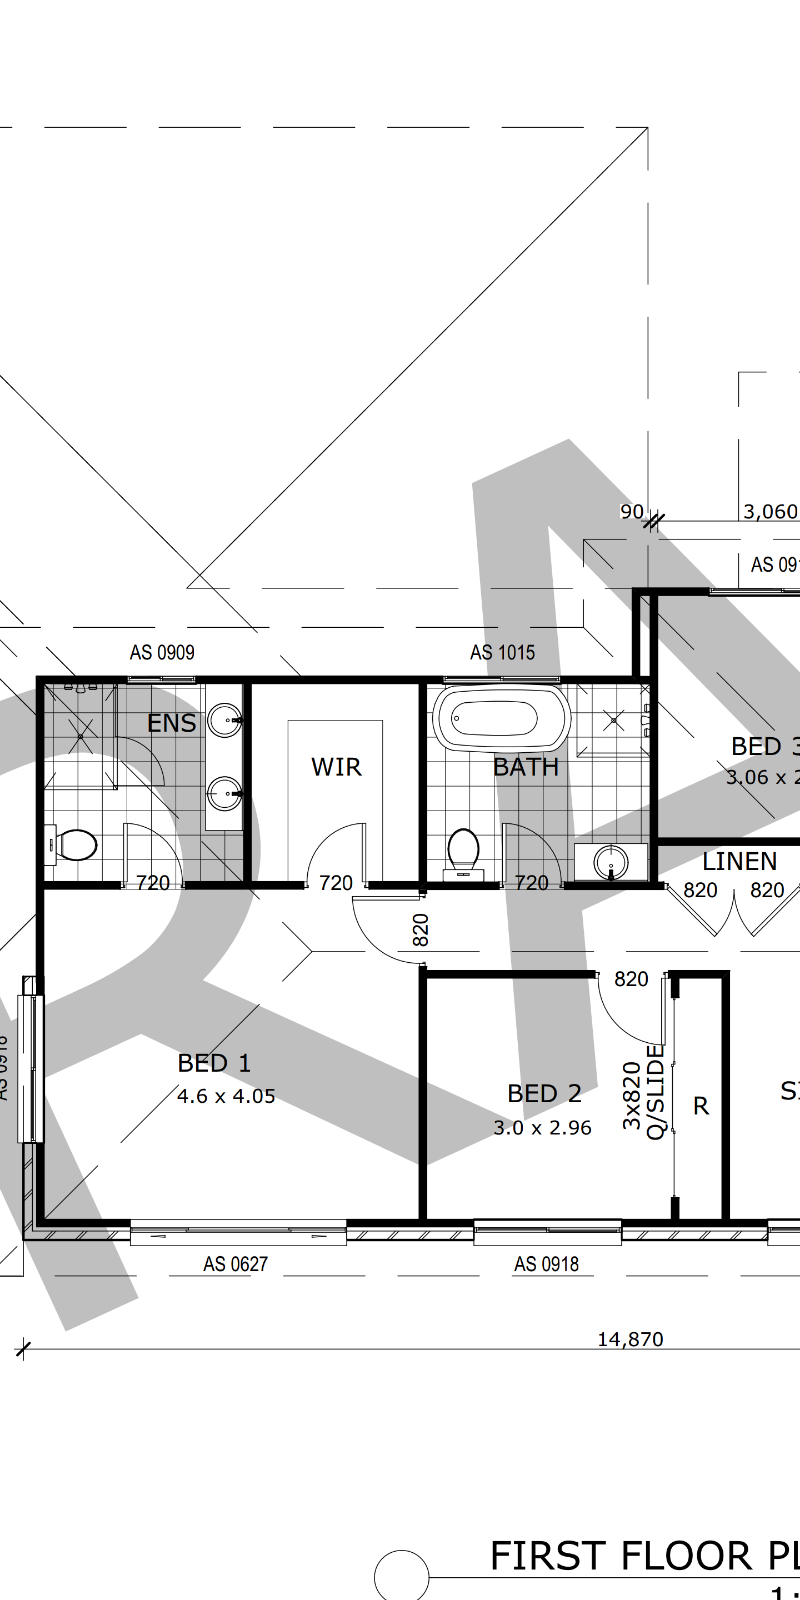 Need help on our bathroom layout